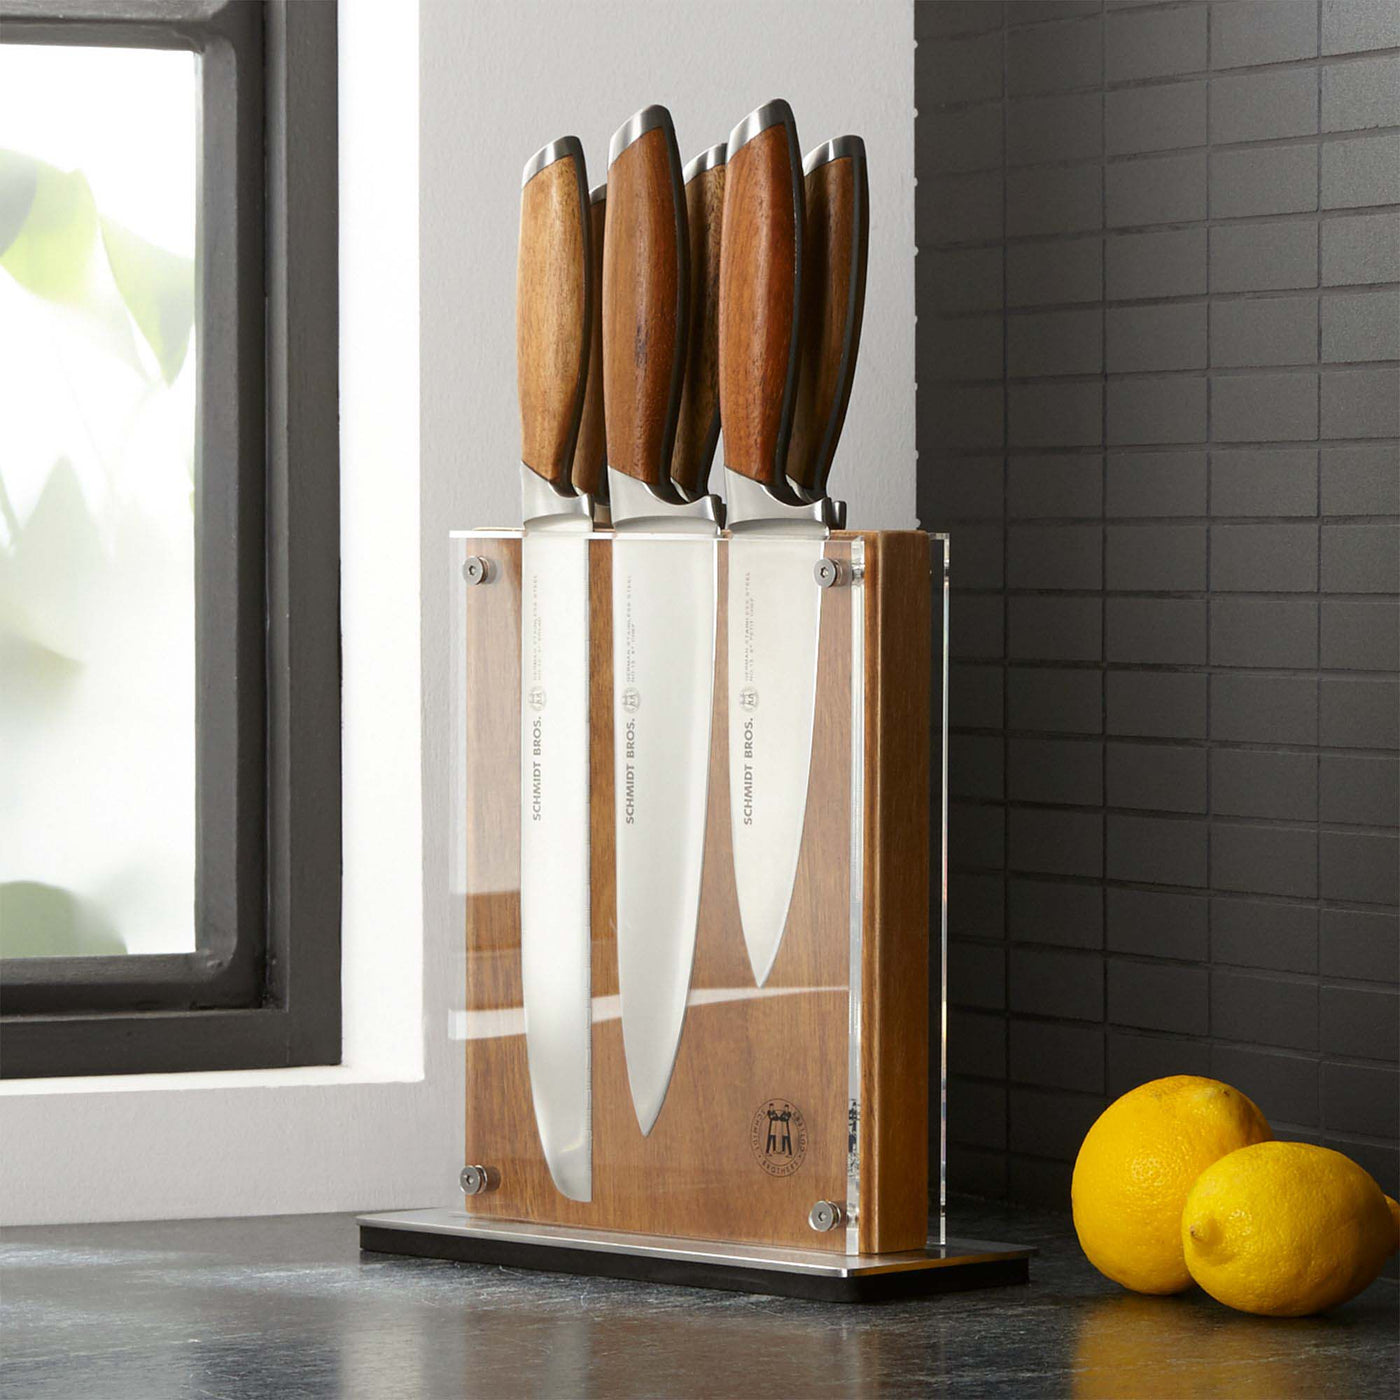  Schmidt Brothers - Bonded Teak, 7-Piece Knife Set, High-Carbon  Stainless Steel Cutlery with Midtown Acacia and Acrylic Magnetic Knife Block:  Home & Kitchen